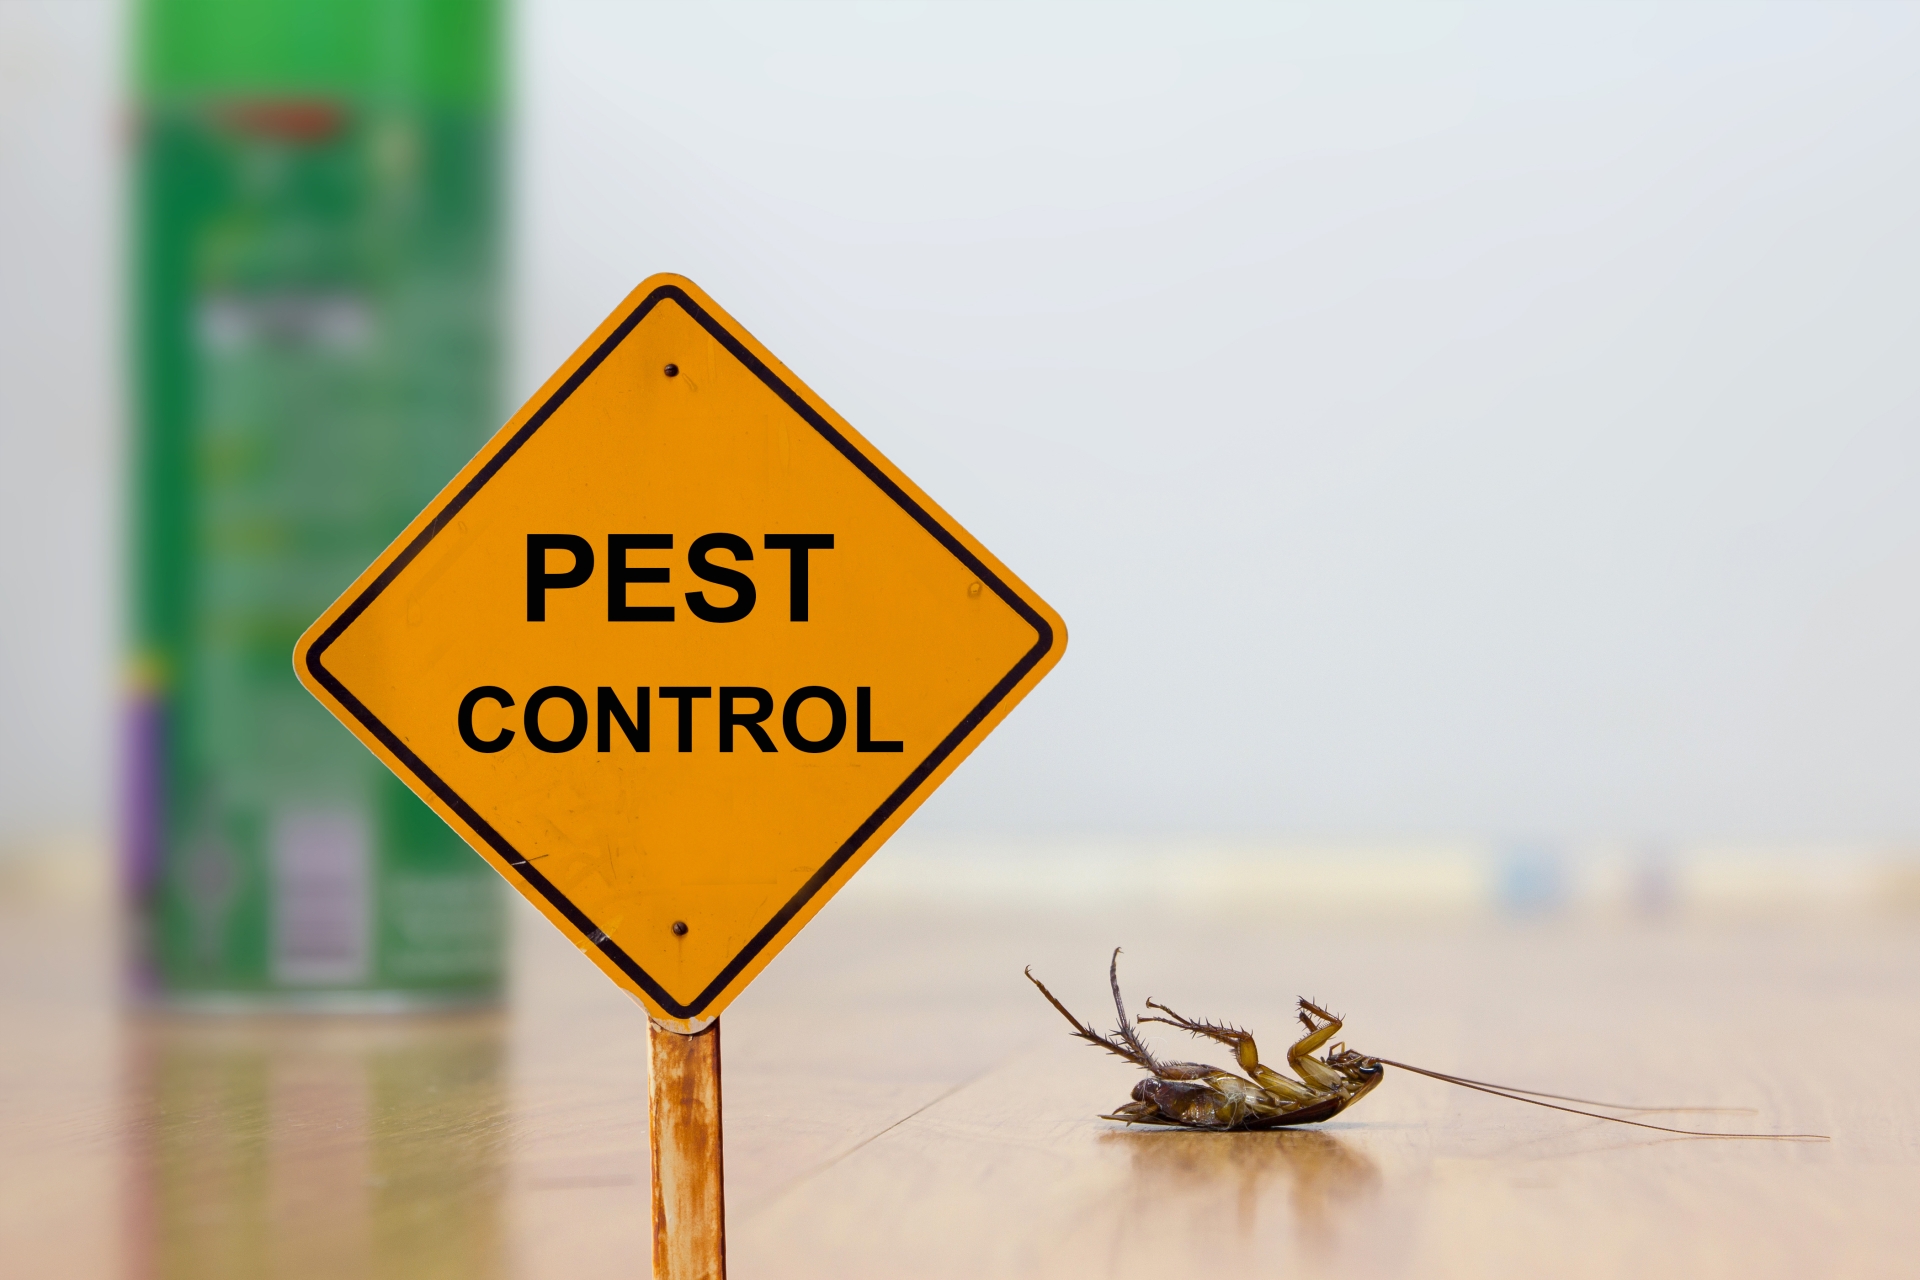 24 Hour Pest Control, Pest Control in Tadworth, Kingswood, Mogador, KT20. Call Now 020 8166 9746